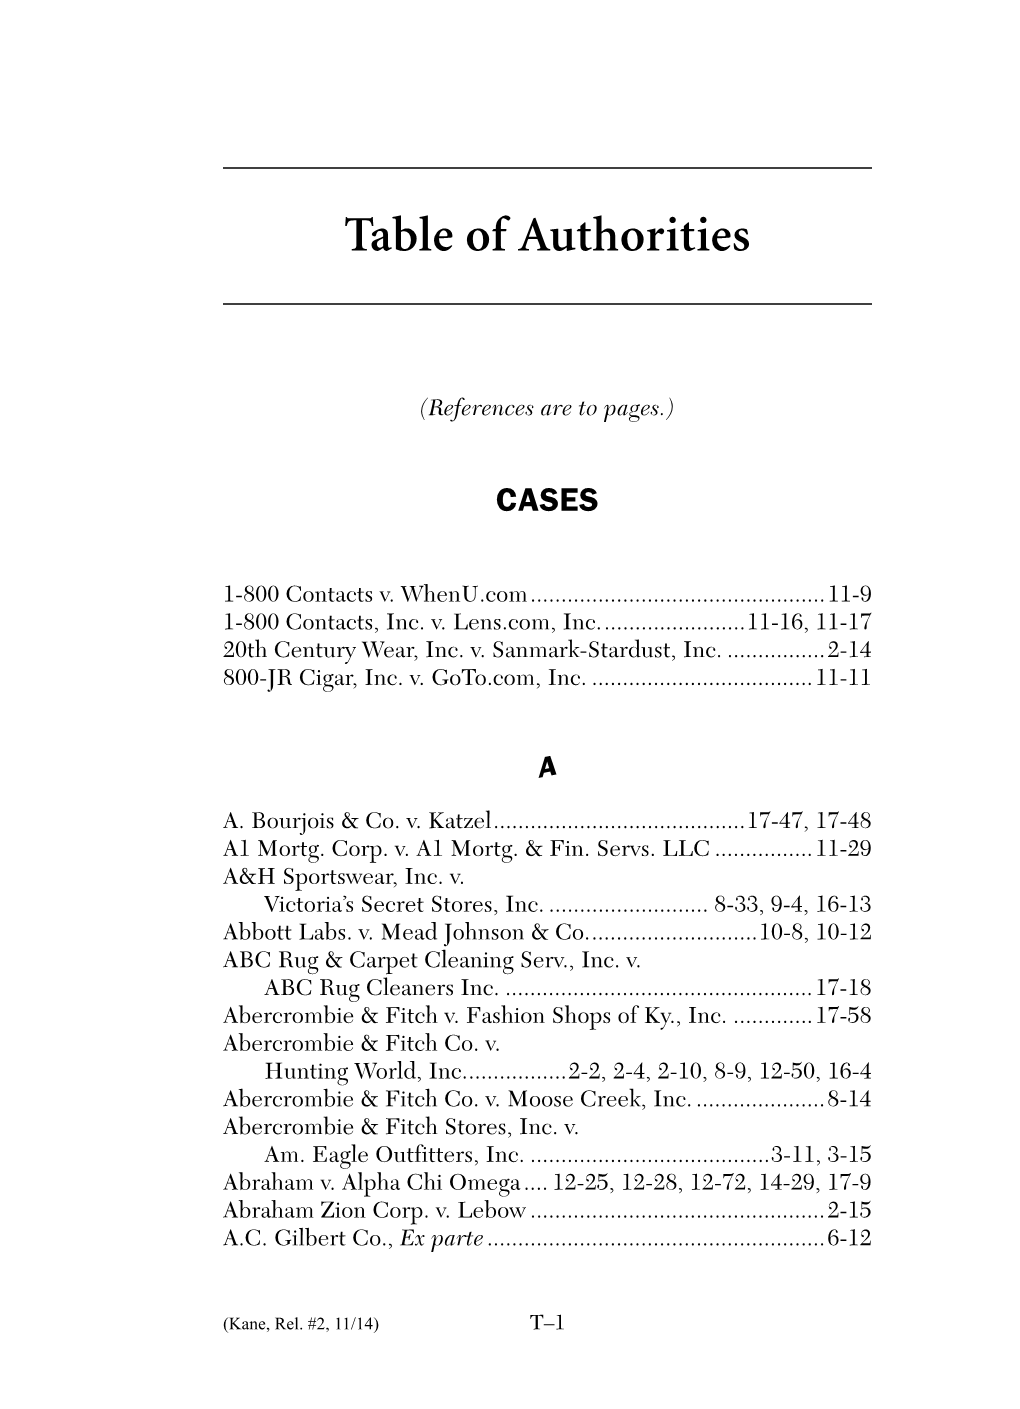 Table of Authorities Kane on TM Law Rel#2.Fm